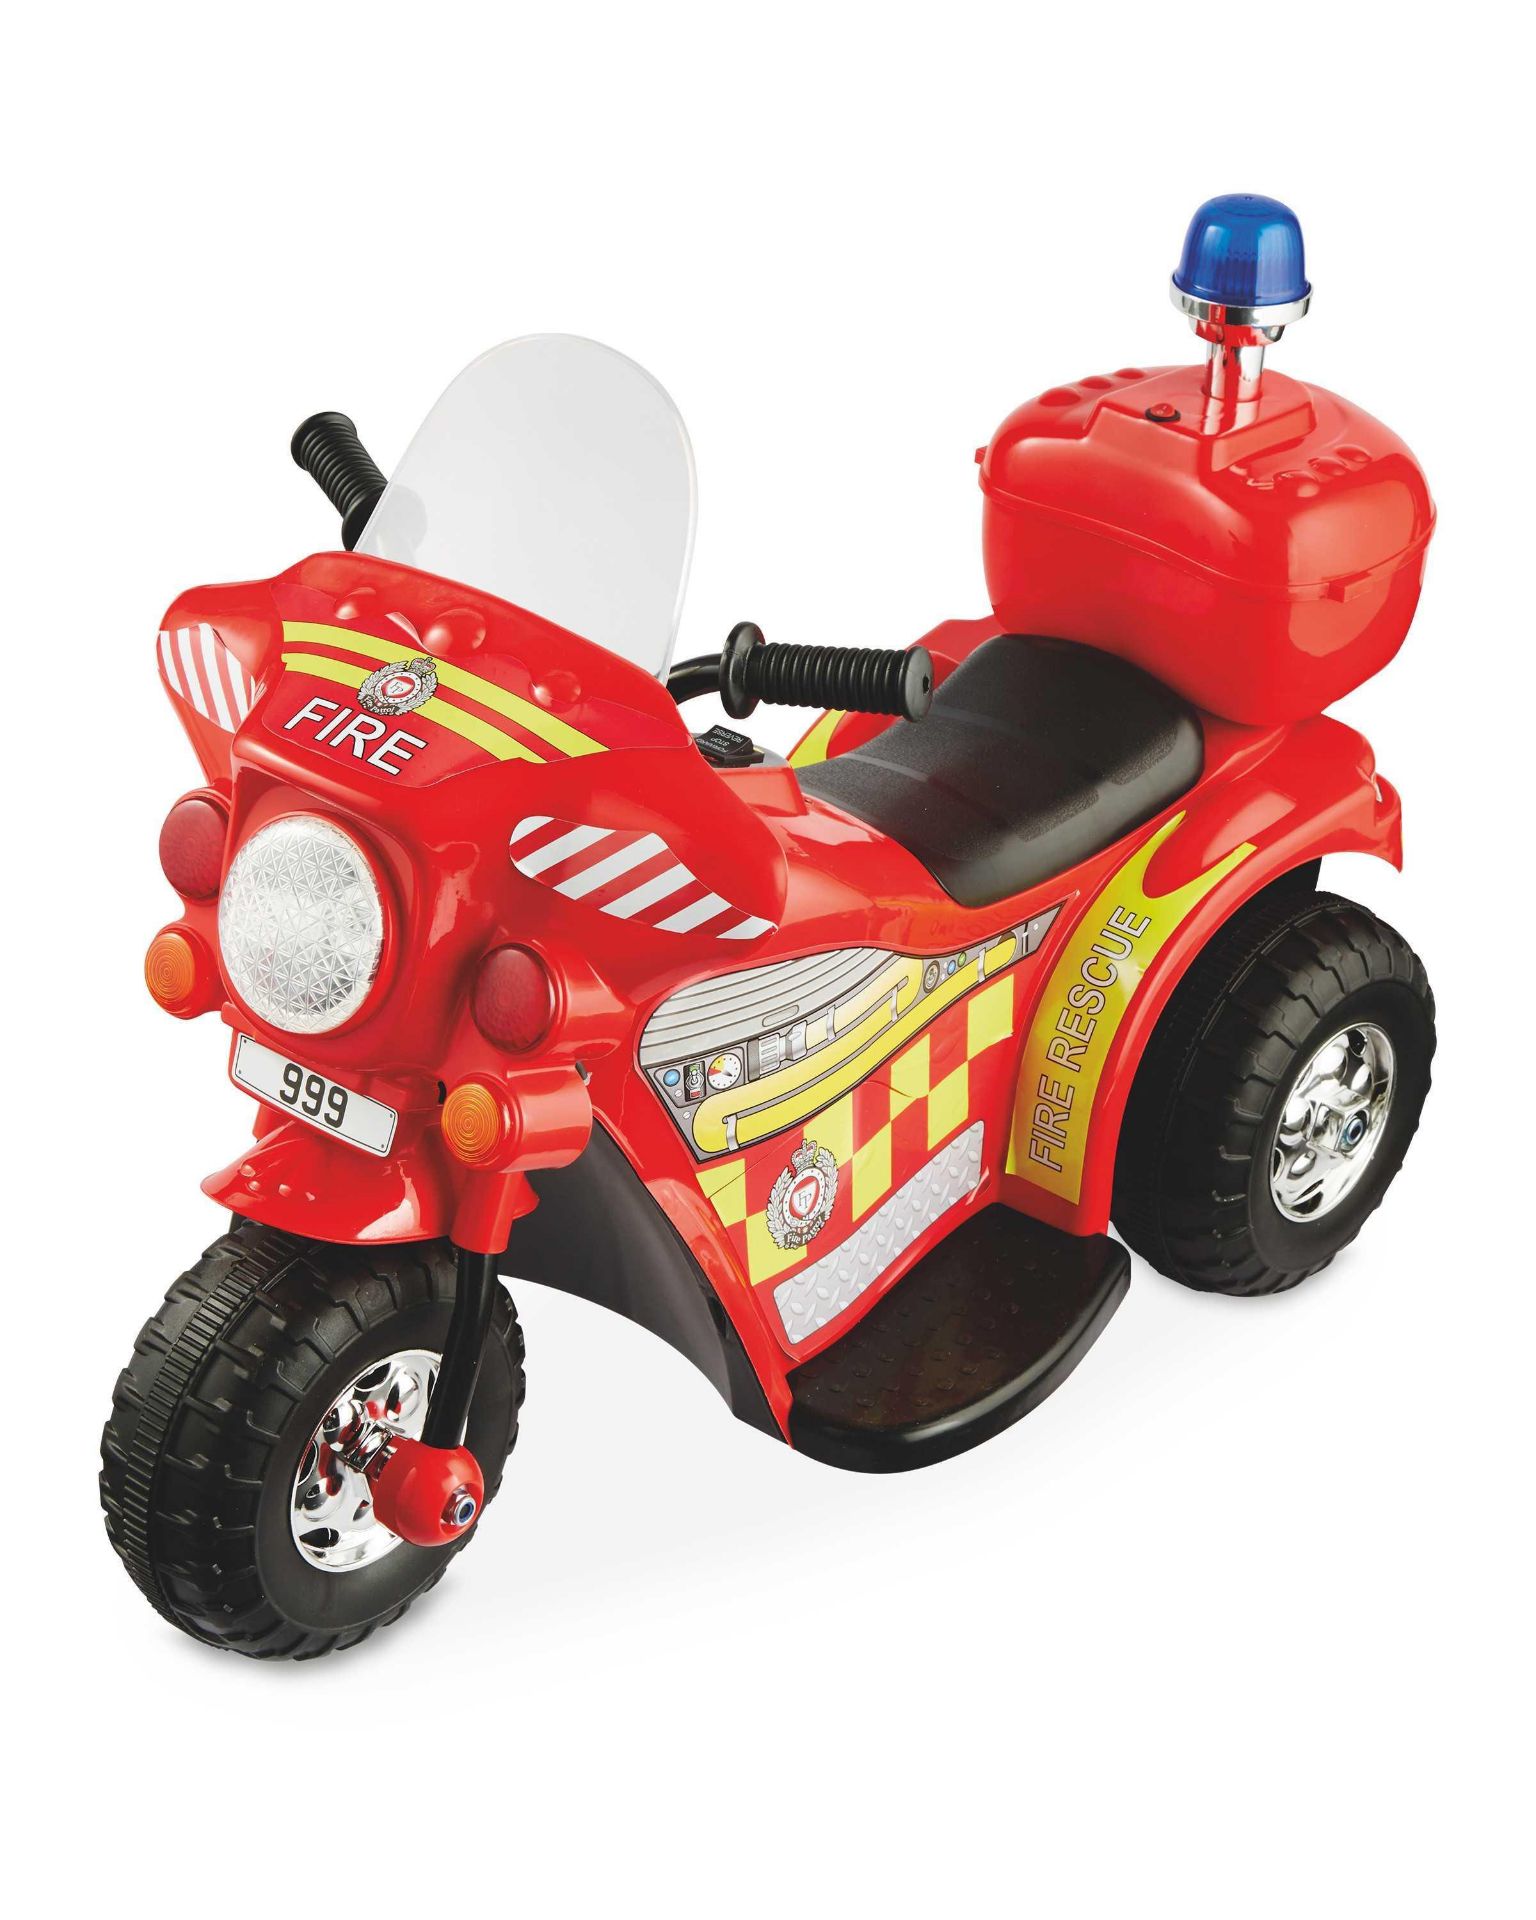 Combined RRP £120 2 Kids Ride On Fire Engine Bikes